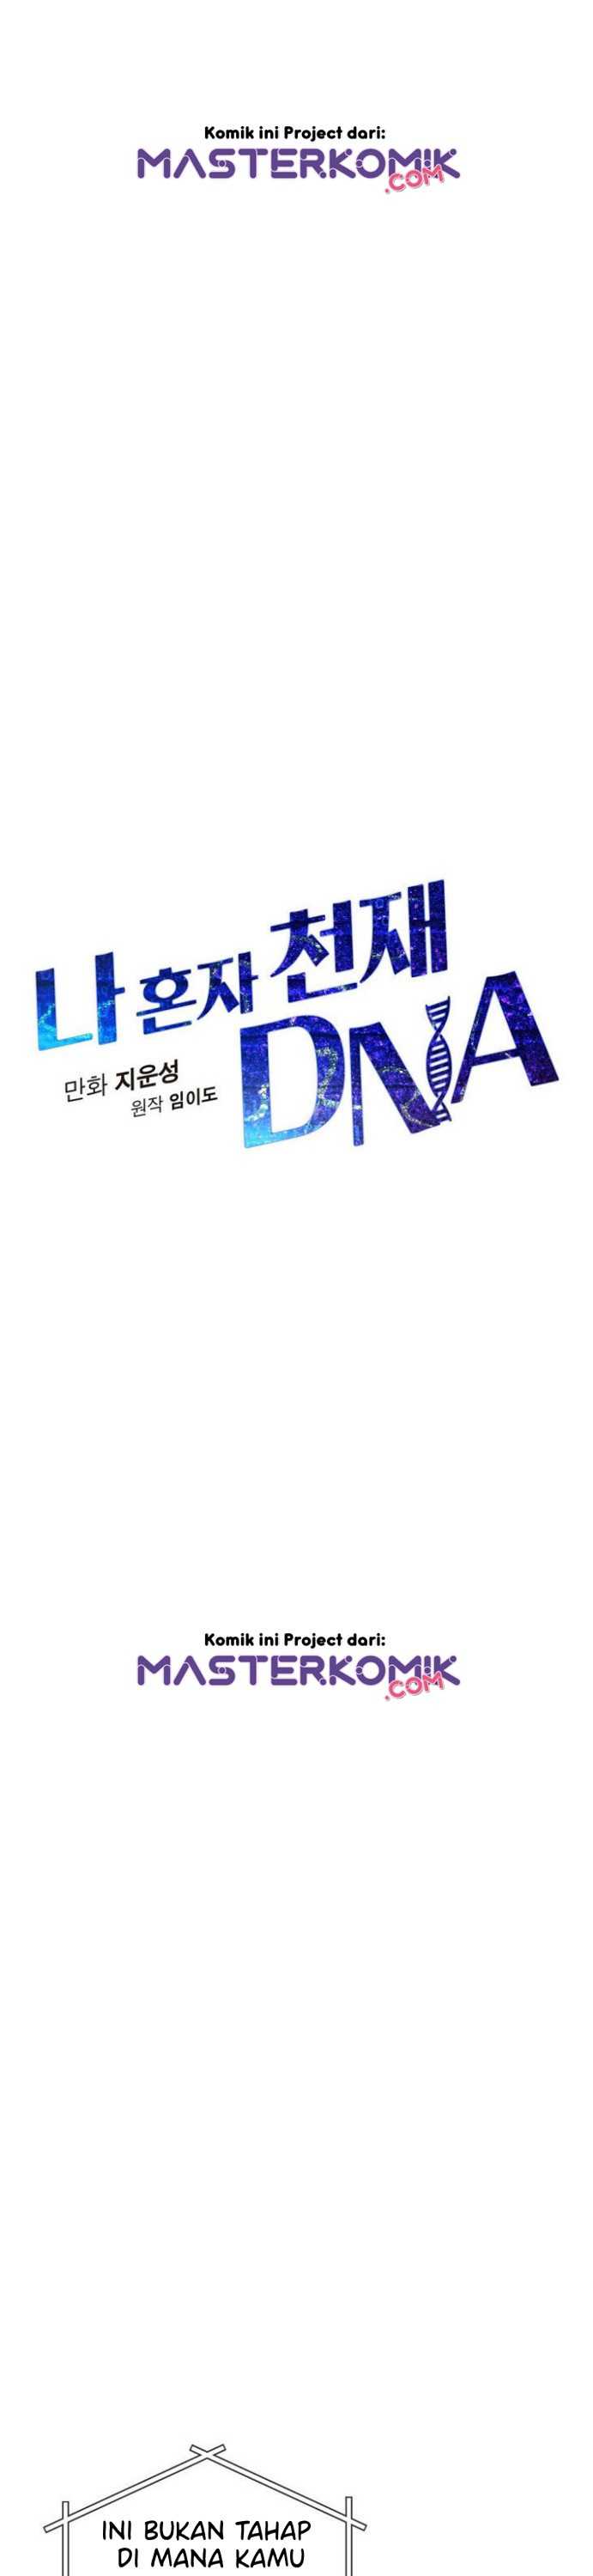 I Am Alone Genius DNA Chapter 44